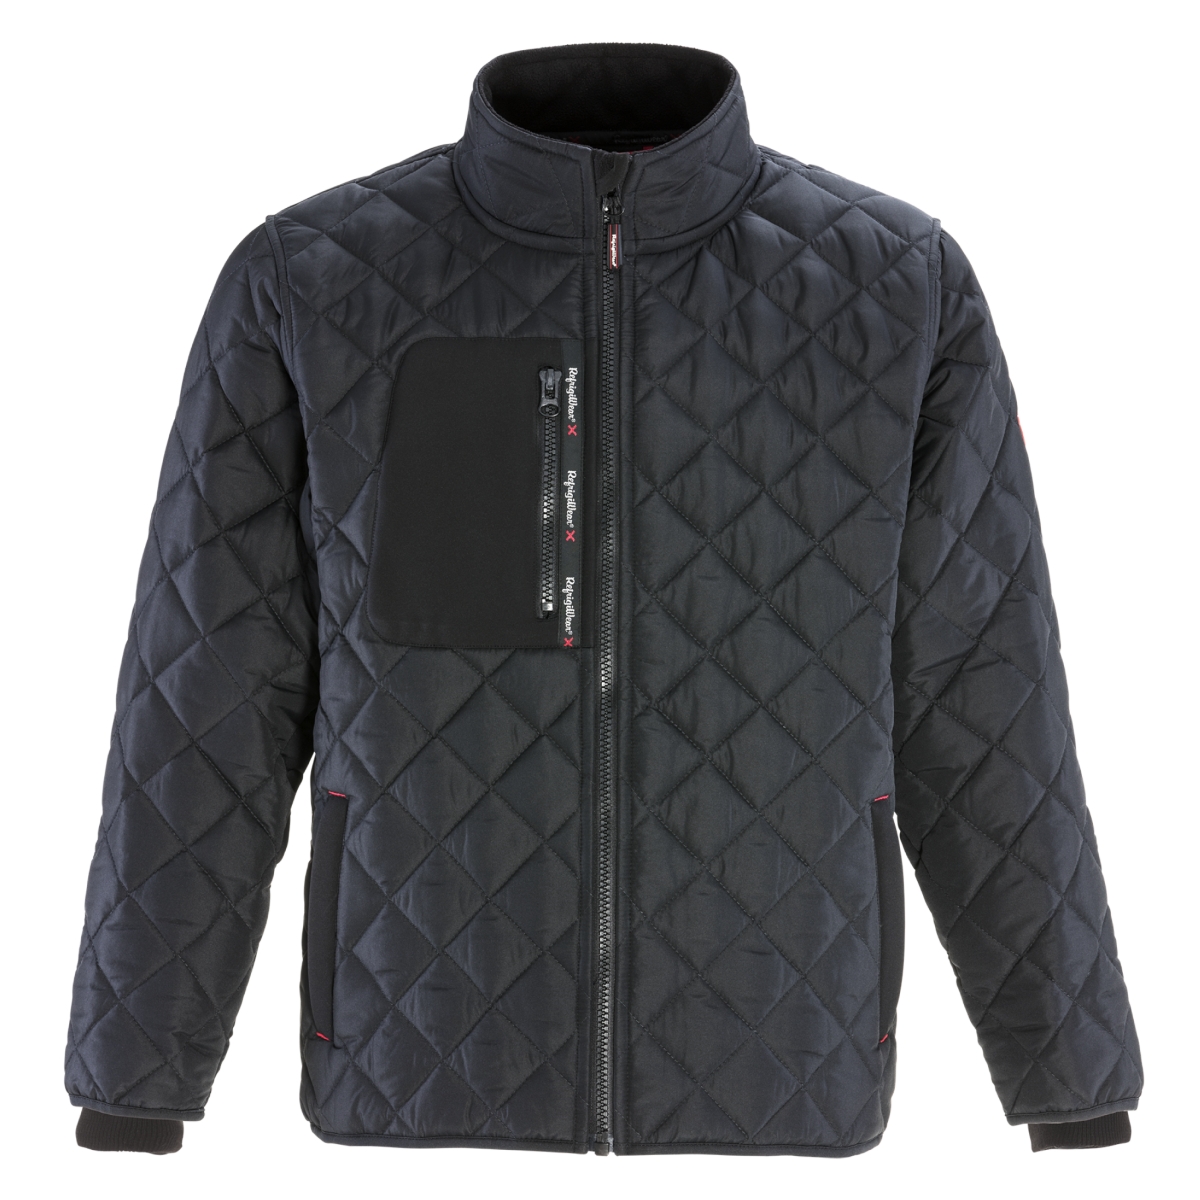 Big & Tall Insulated Diamond Quilted Jacket with Fleece Lined Collar - Black